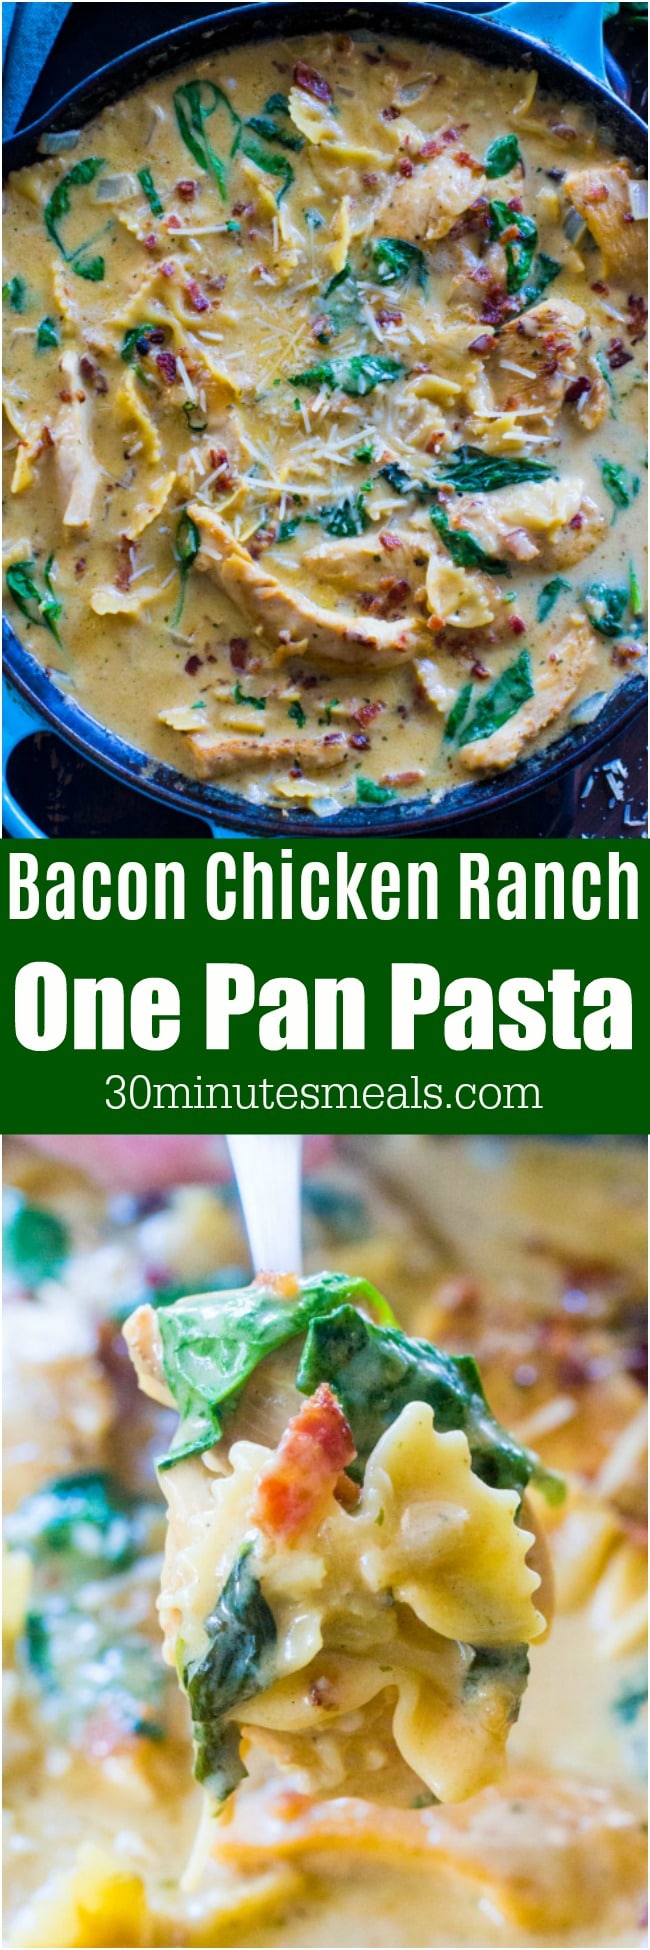 30 Minute Pasta Recipes are the perfect weeknight dinners, easily made in just one pan. This Chicken Bacon Ranch Pasta is tasty, full of flavor and hassle free.